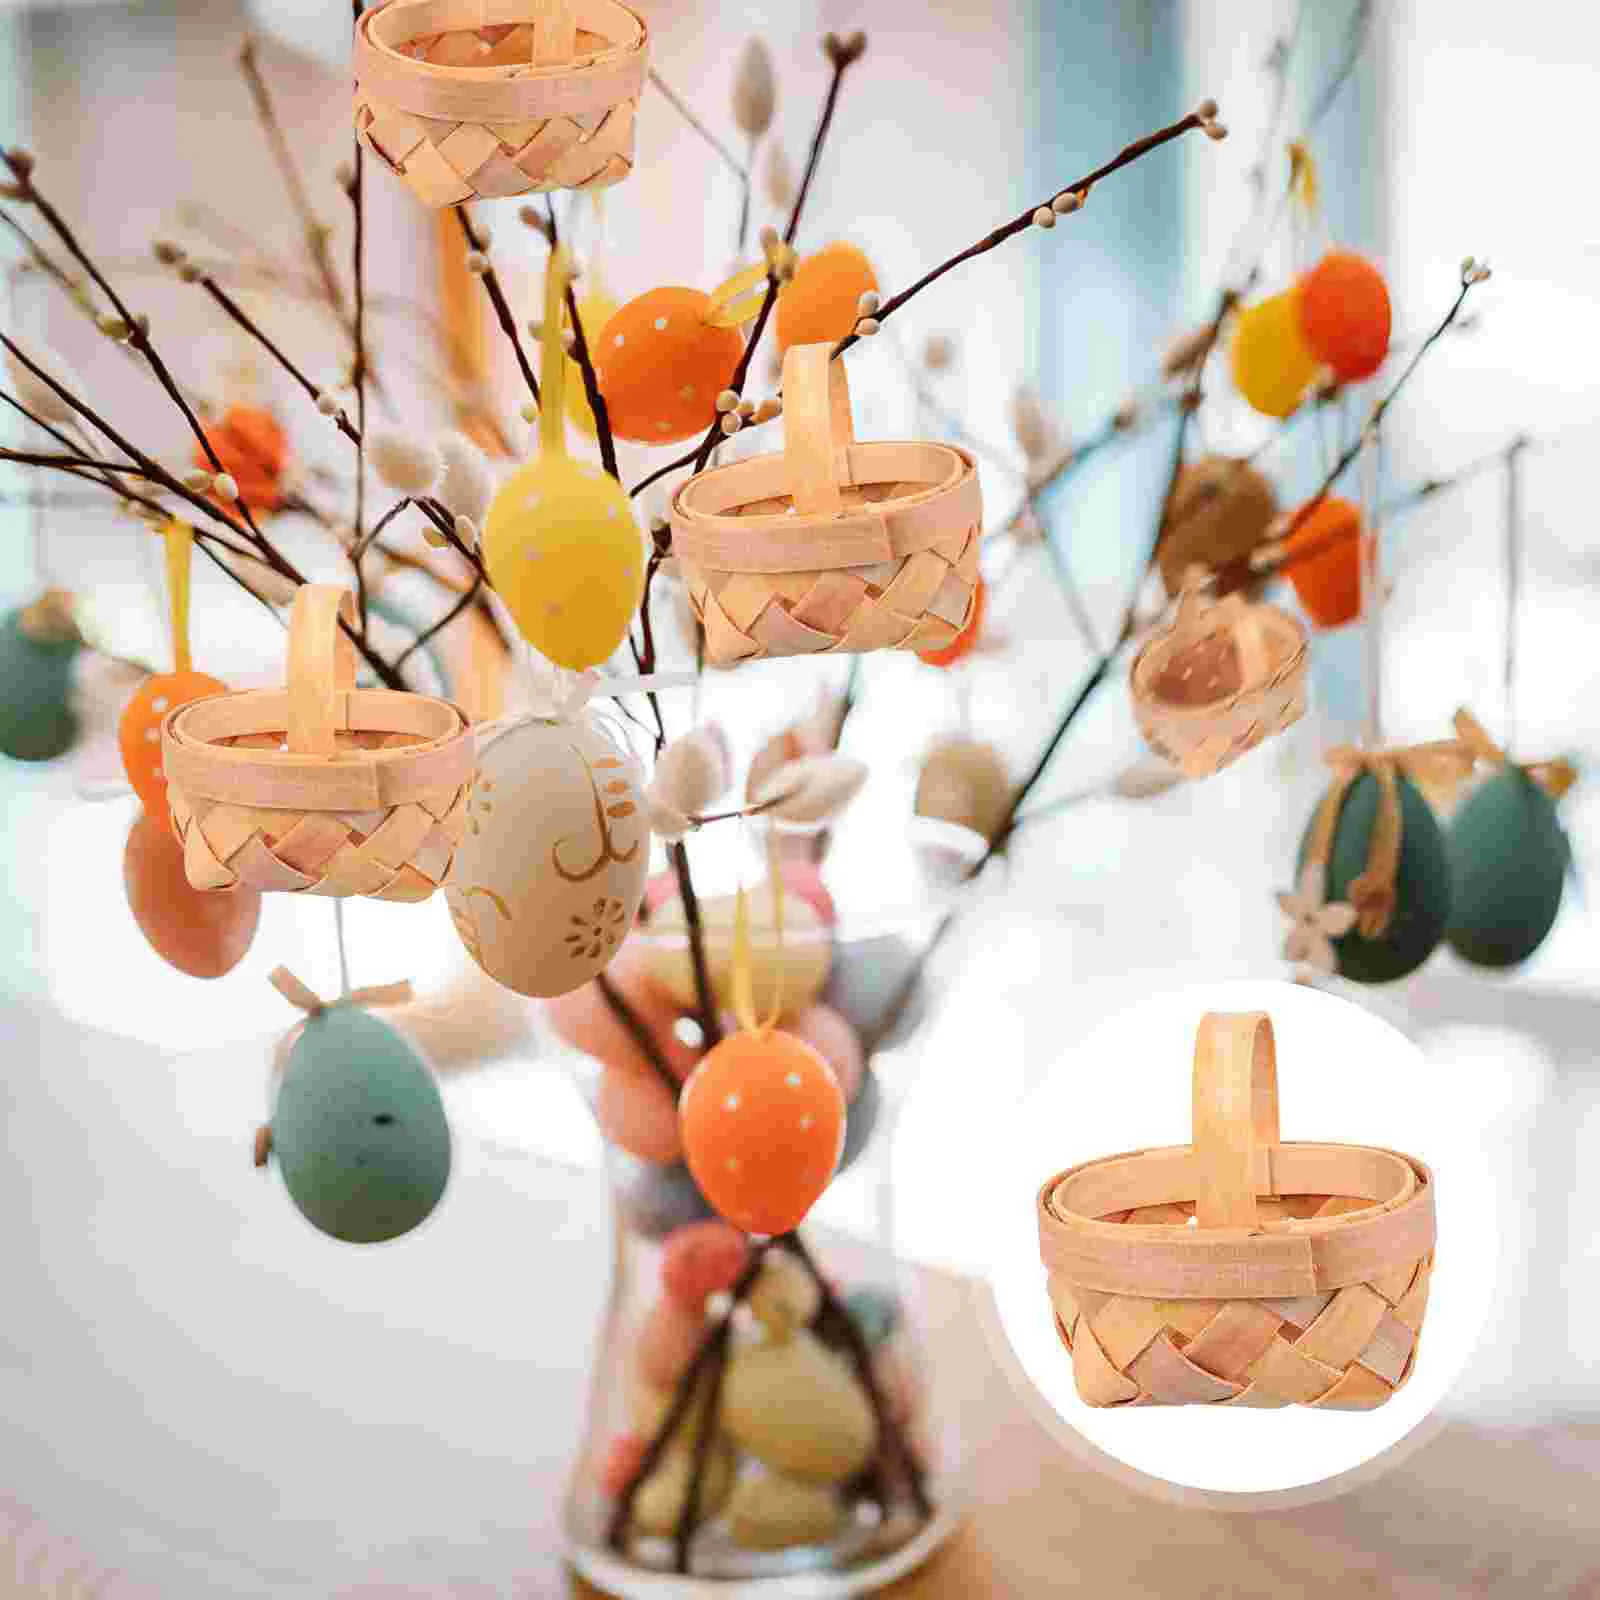 

12pcs Woven Baskets with Handles Tree Hanging Miniature Wooden Chip Baskets Ornaments for Farmhouse Rustic Wedding Party